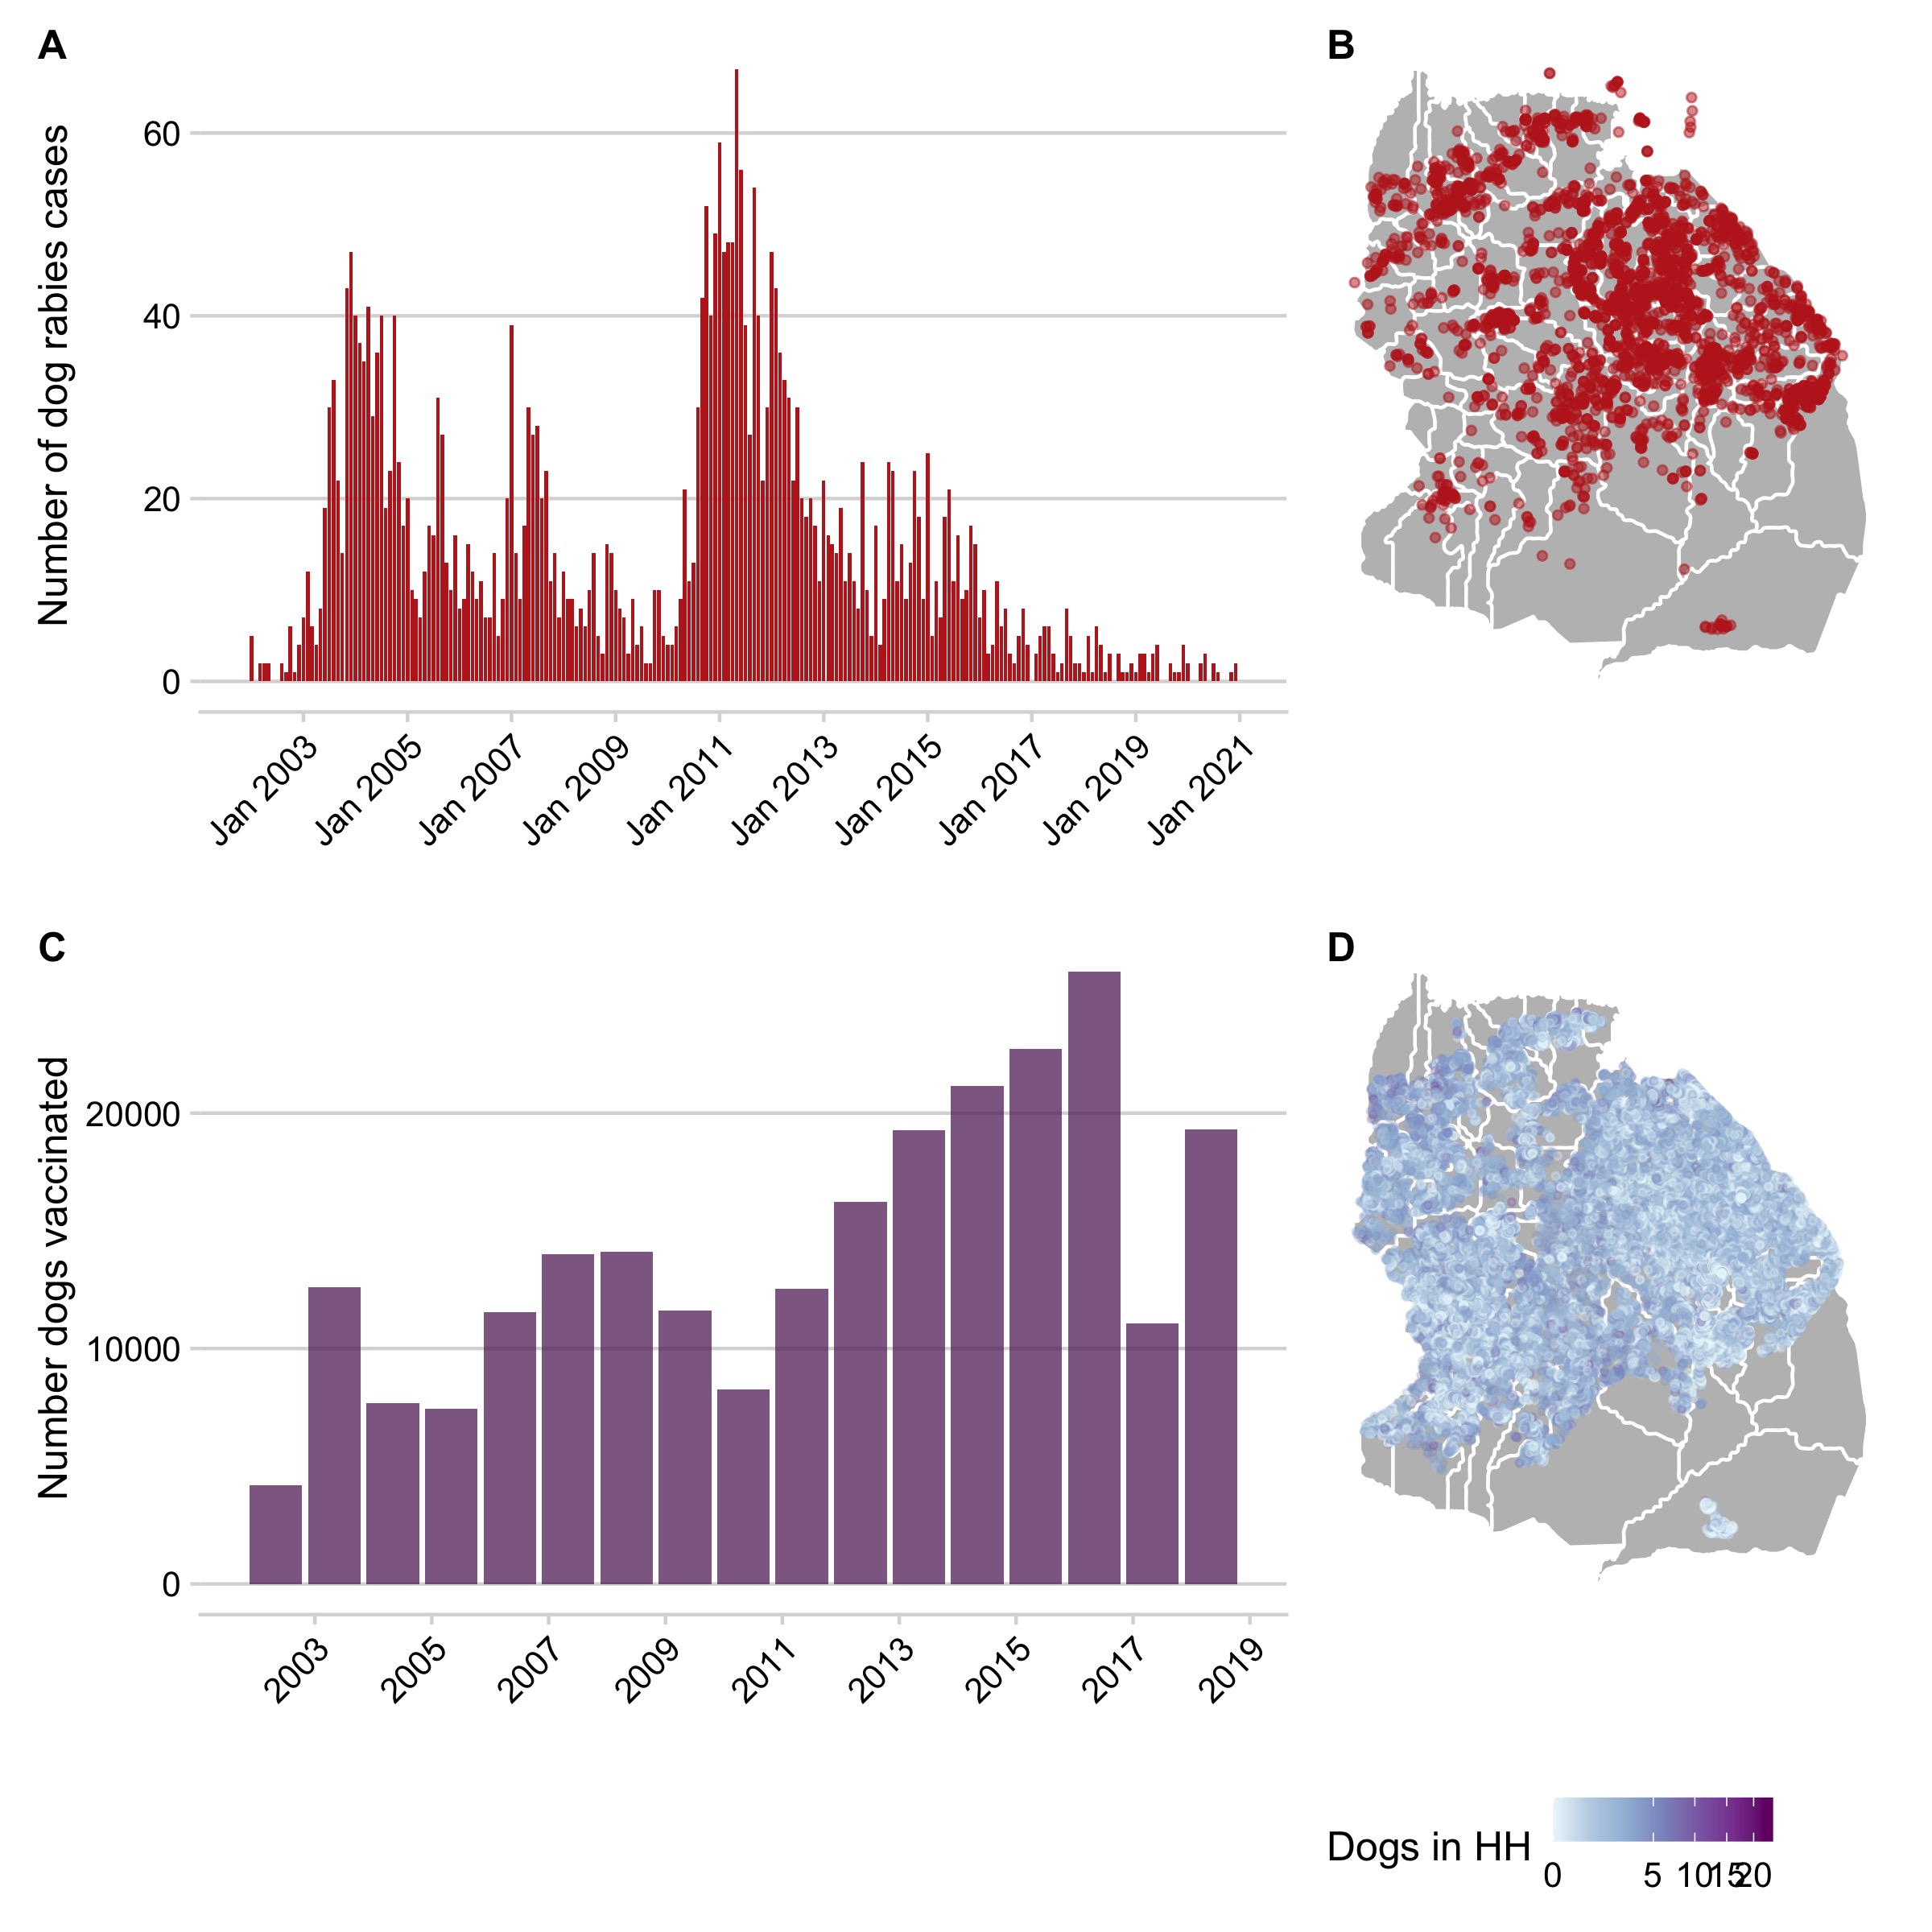 Datasets used in the analyses. A) Shows the time series of monthly rabies cases in domestic dogs and B) shows their spatial distribution across the district. C) The annual number of dogs vaccinated each year during mass campaigns. D) The location of household census data with colors showing the number of dogs owned per household. Polygons delineate village boundaries in the district.